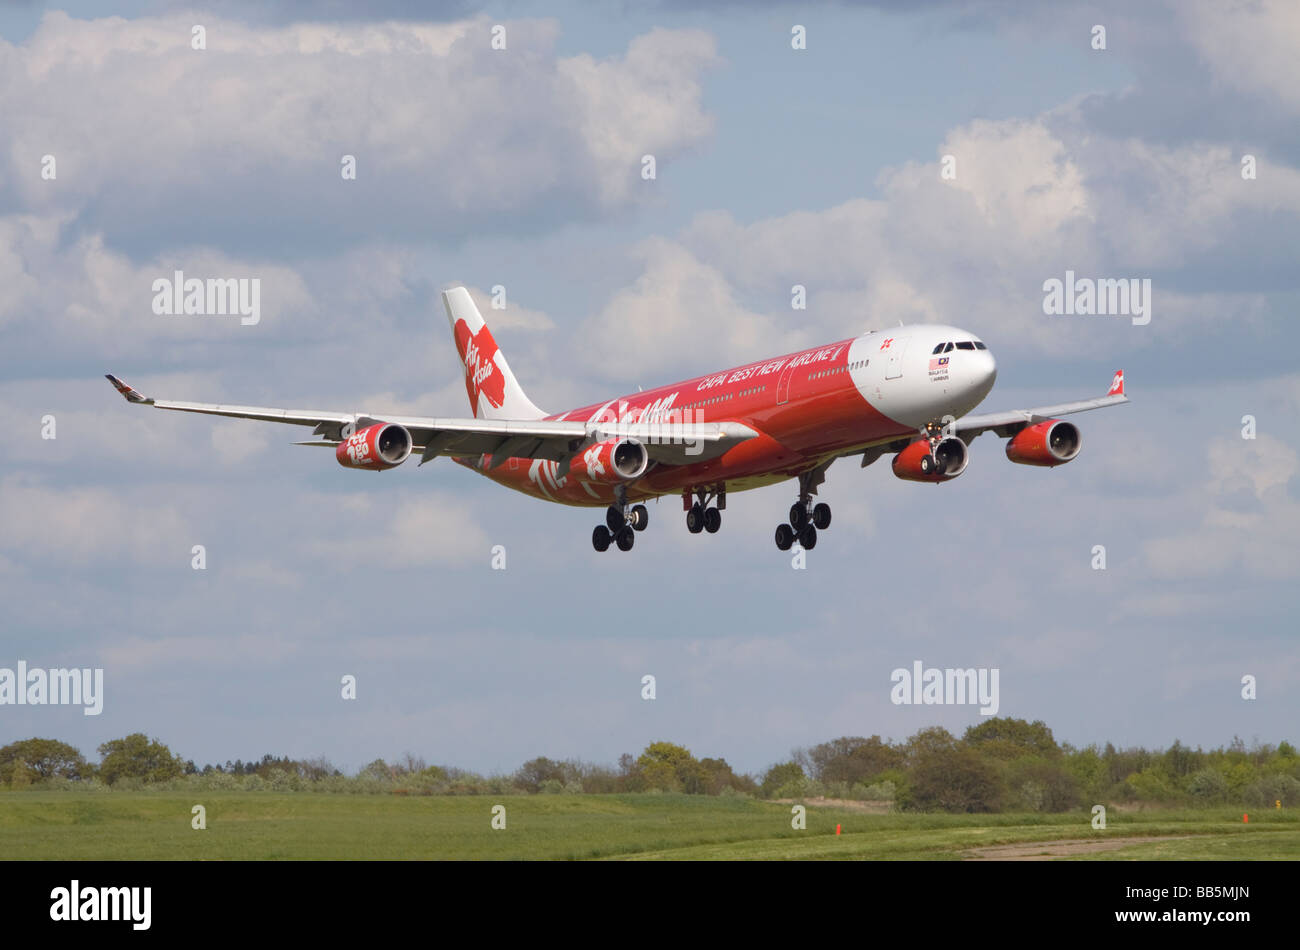 AirAsia X Airbus A340-313X aircraft landing at London Stansted airport. Stock Photo